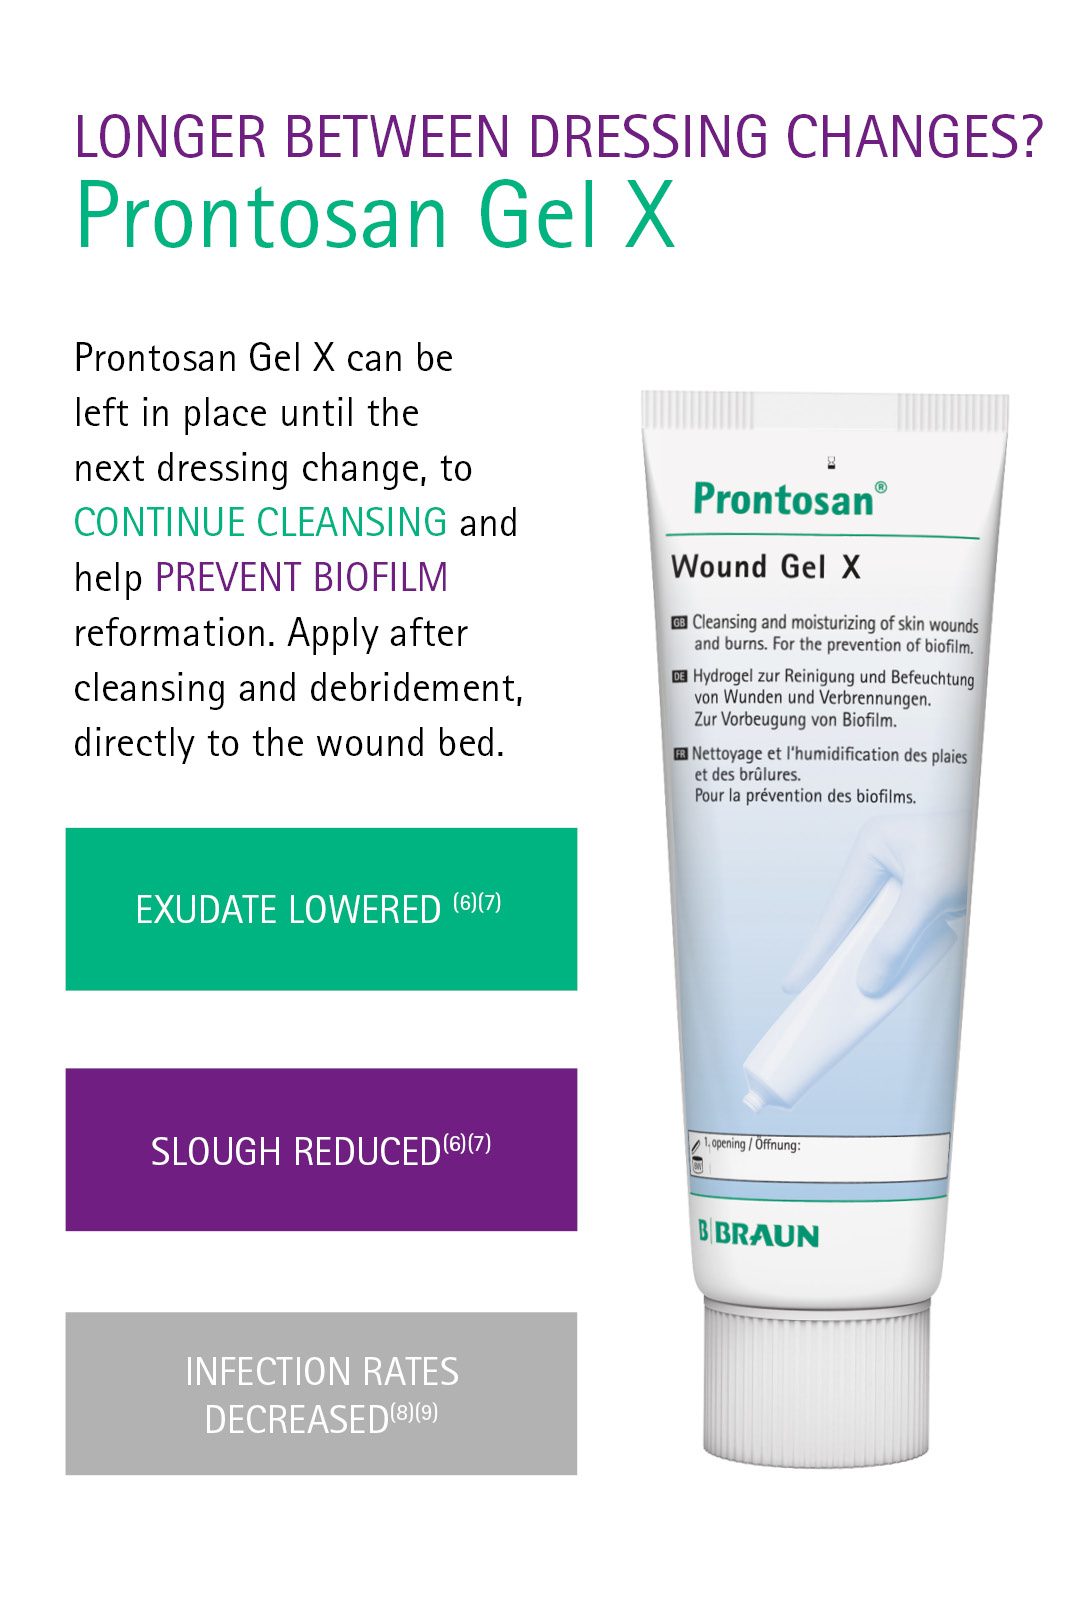 Prontosan for longer time between dressing changes